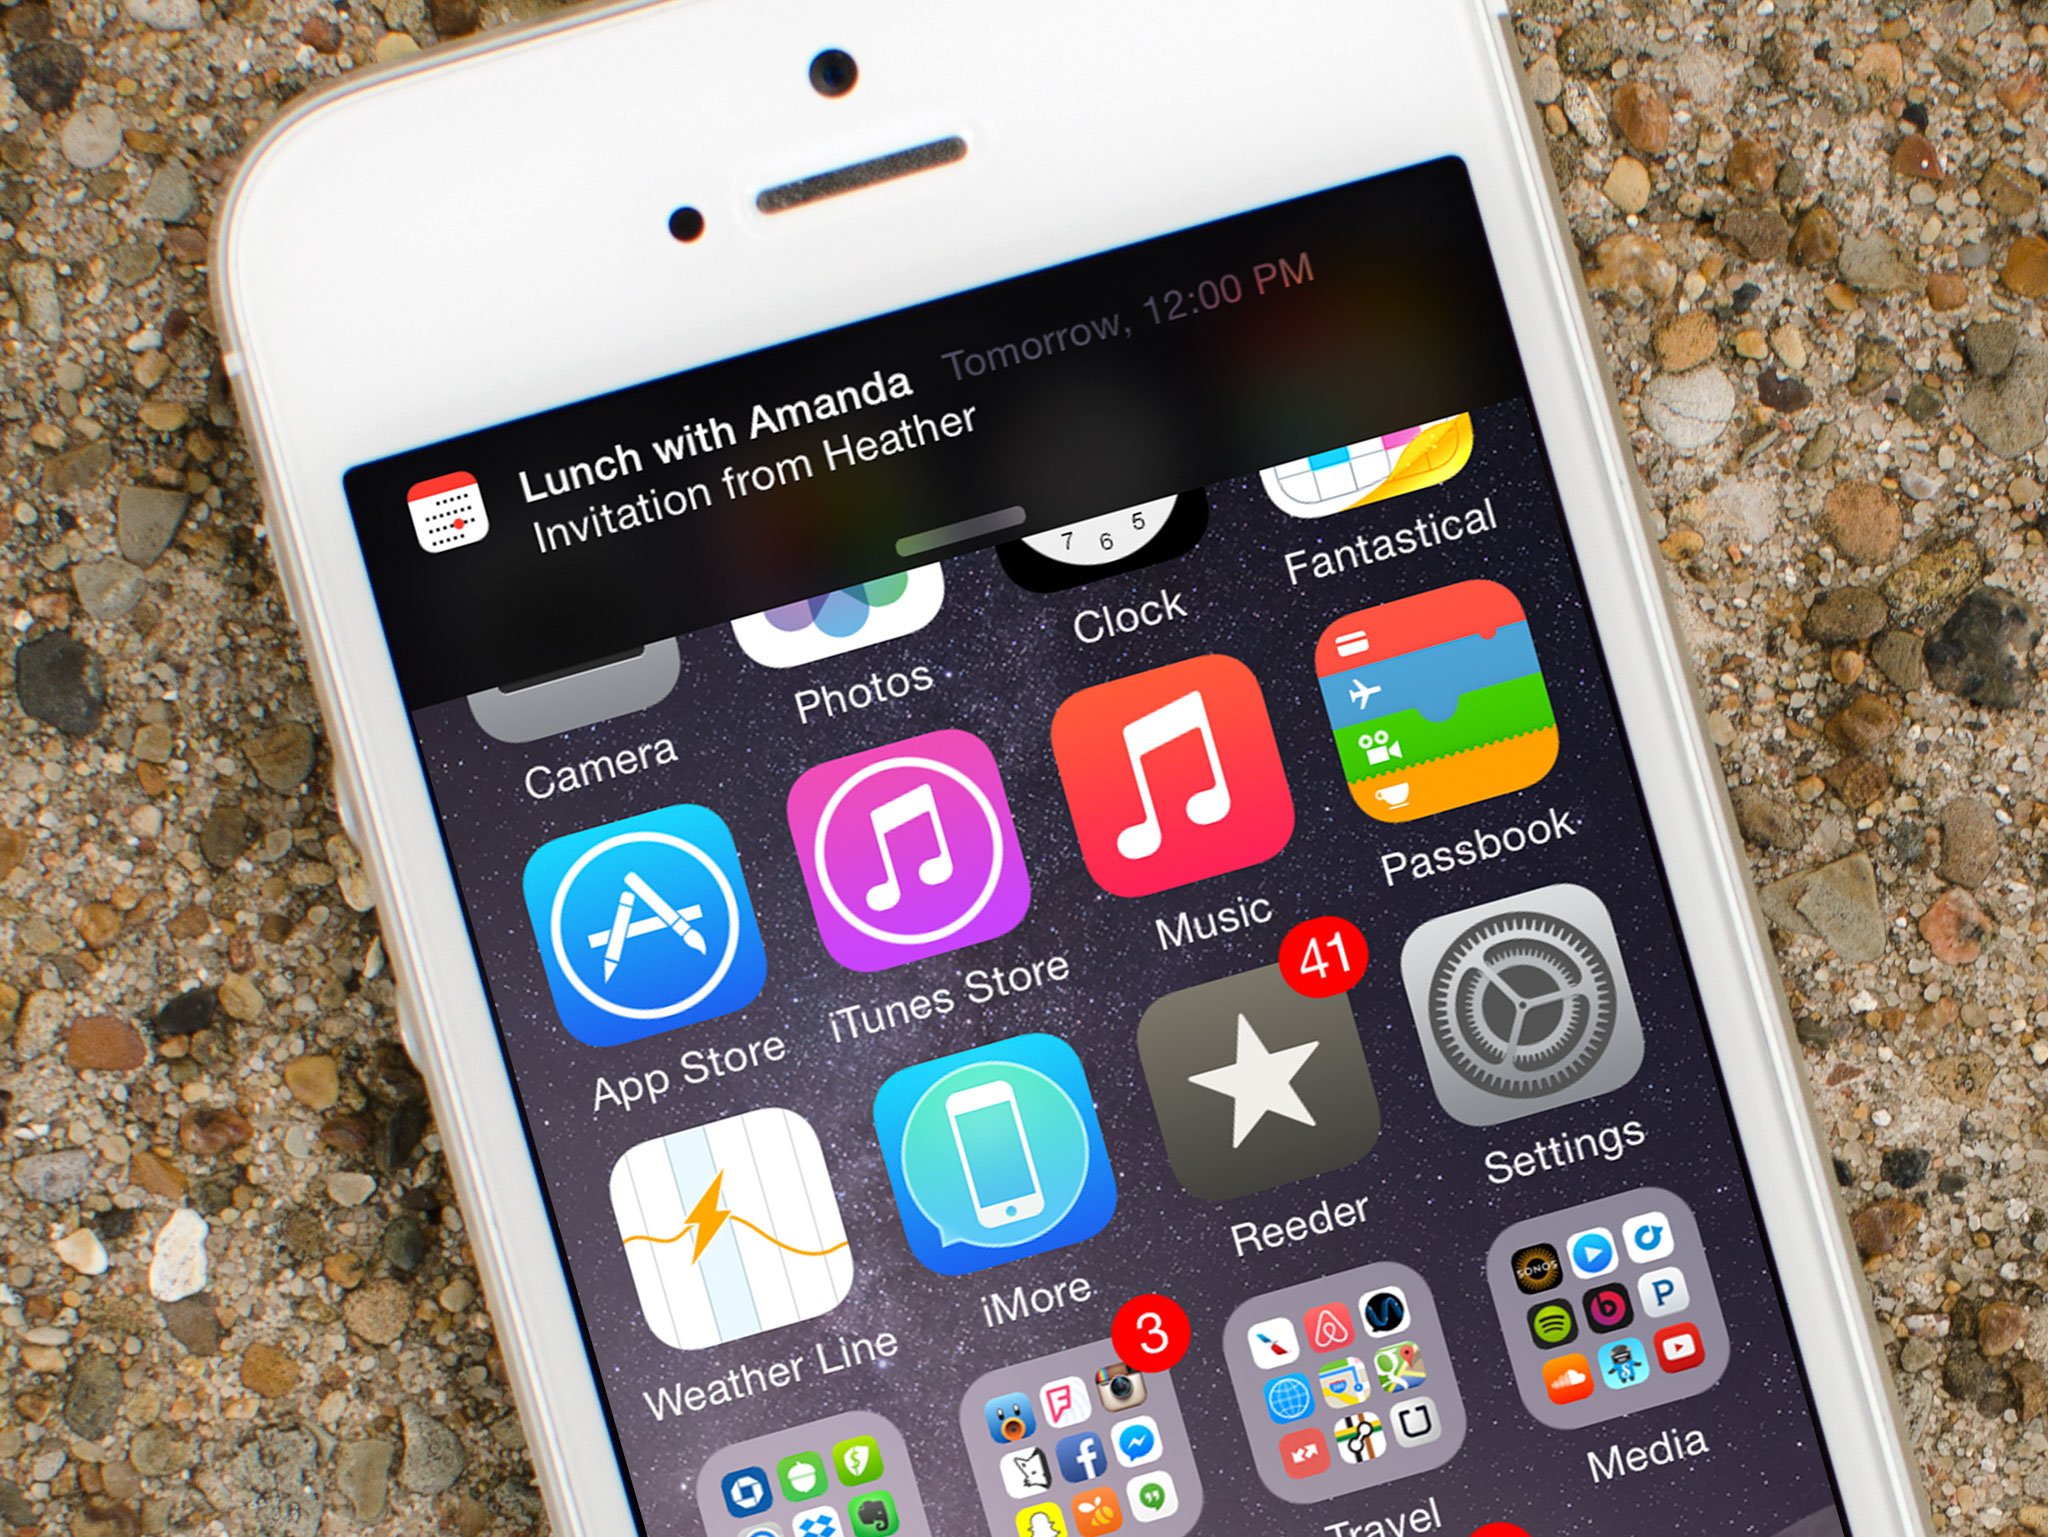 How to use interactive notifications in iOS 8